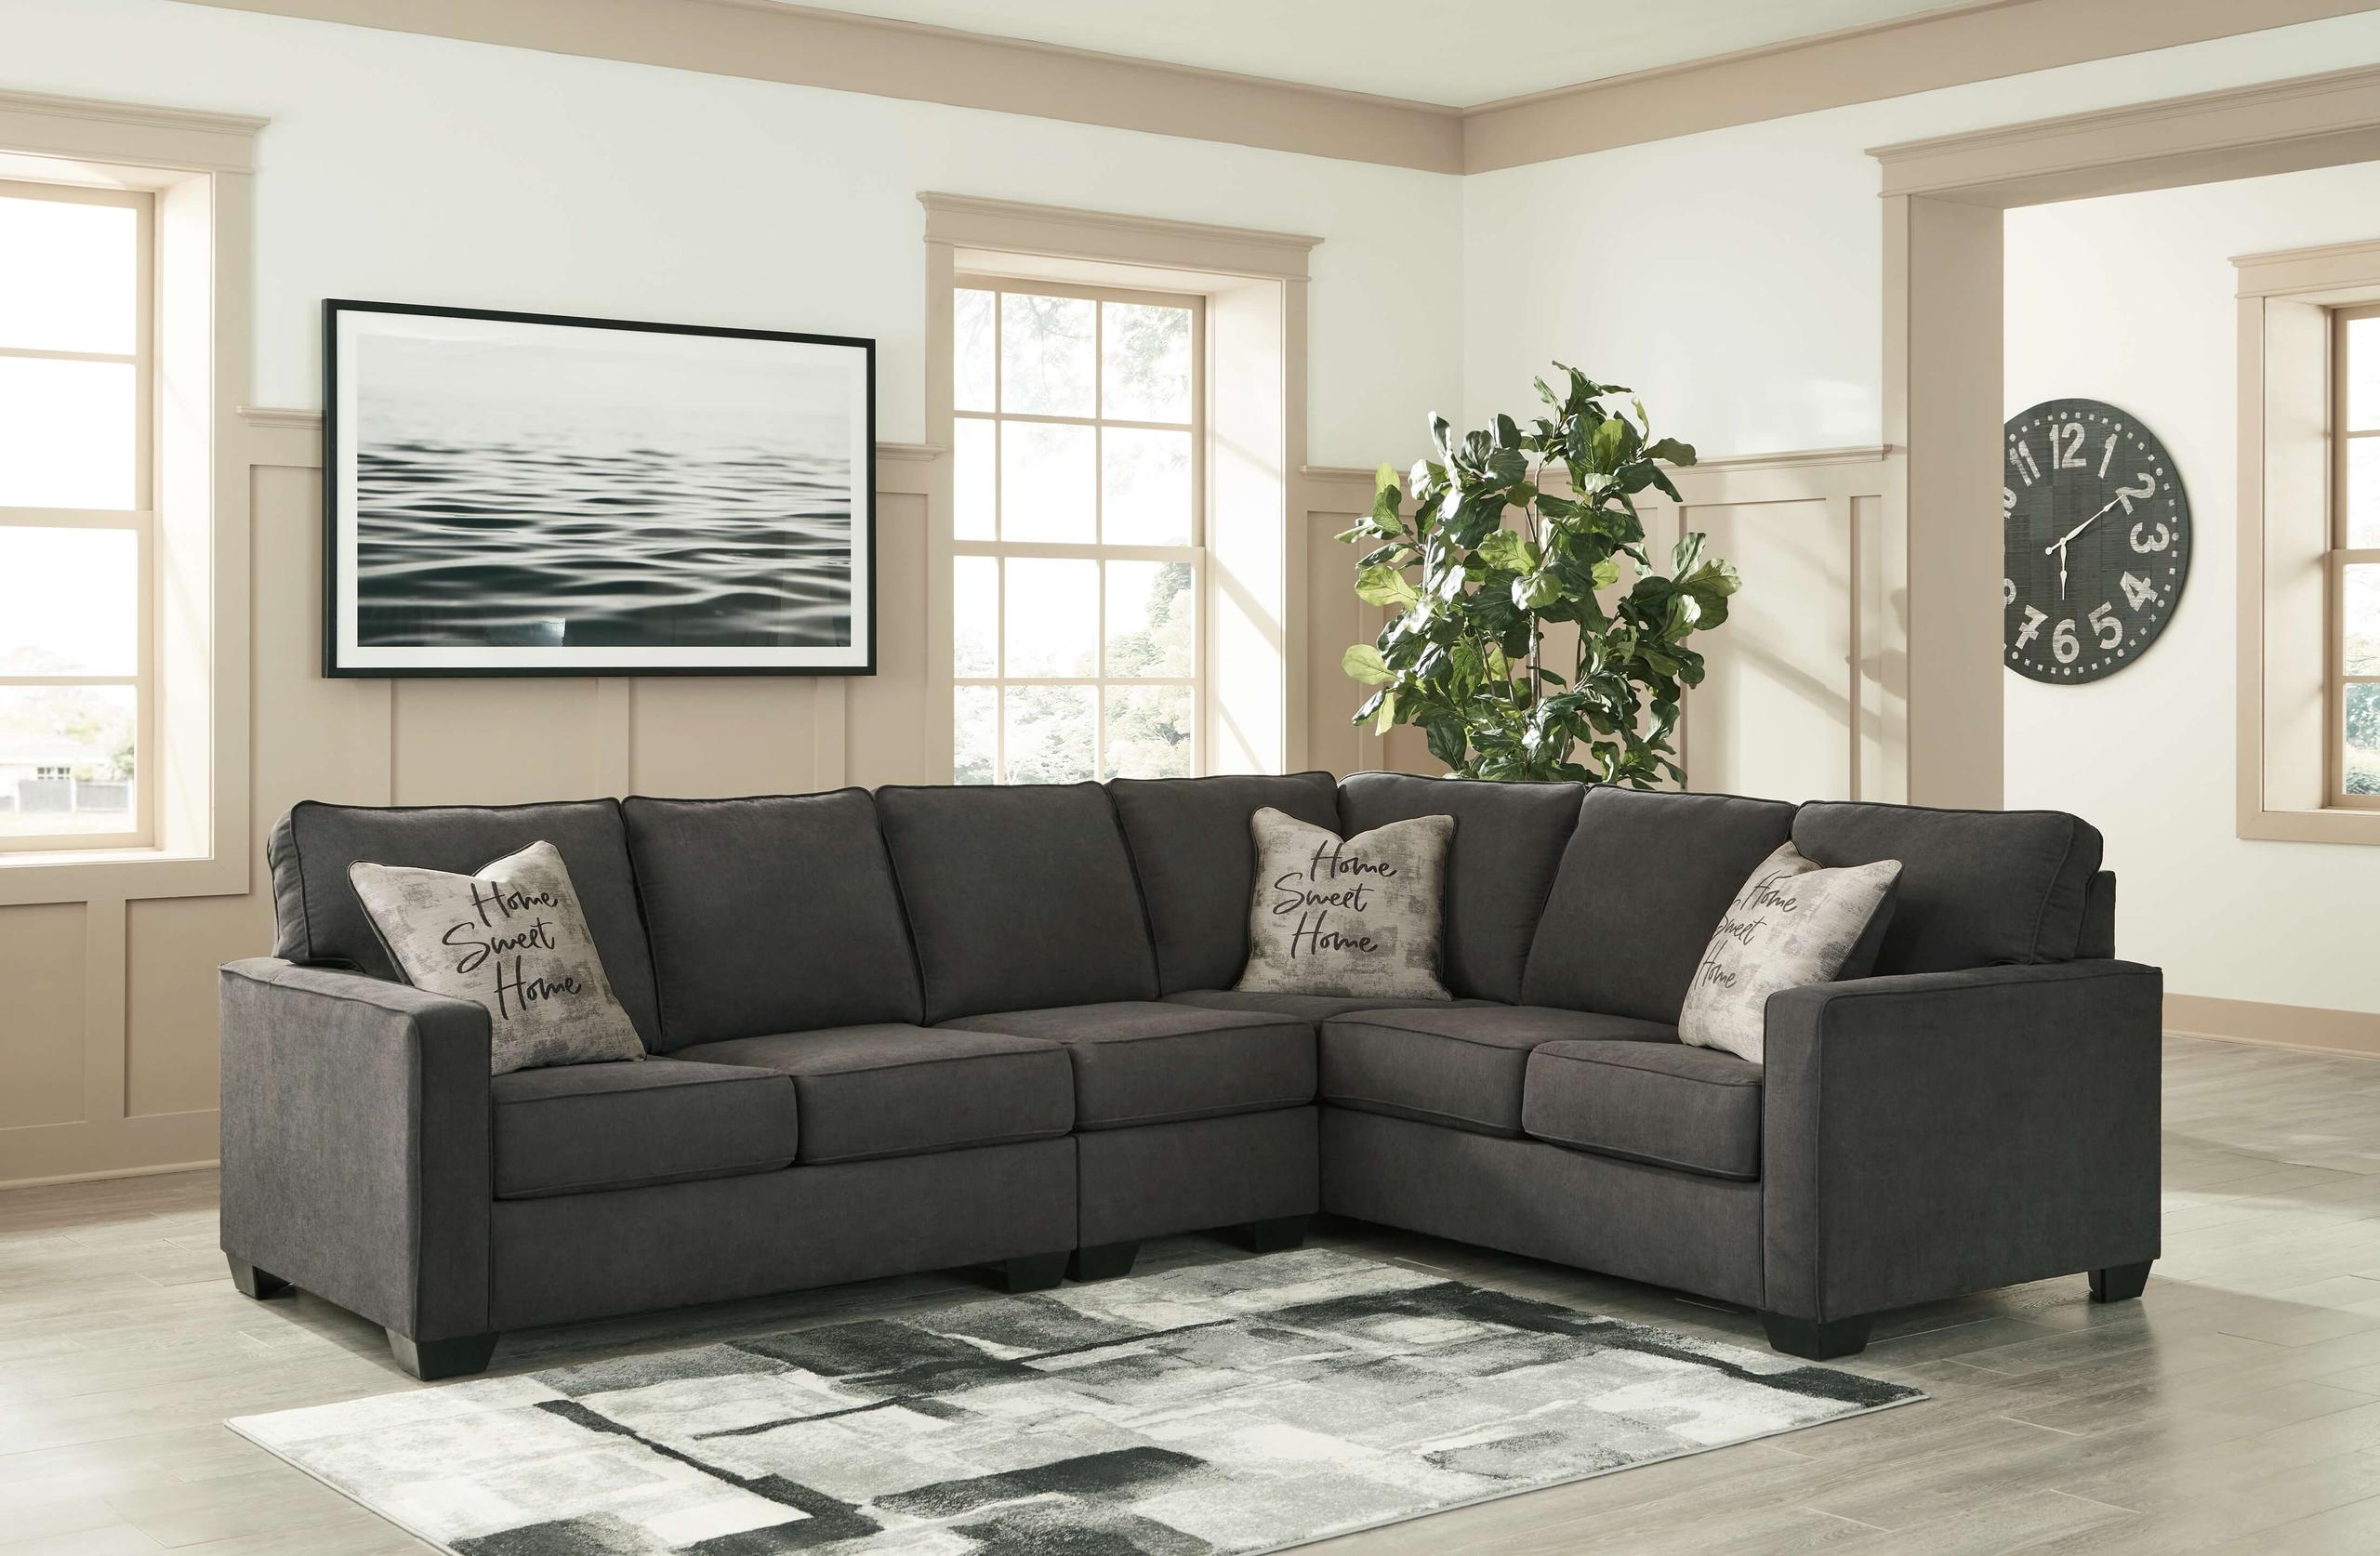 ASHLEY FURNITURE 59005S4 Lucina 3-piece Sectional